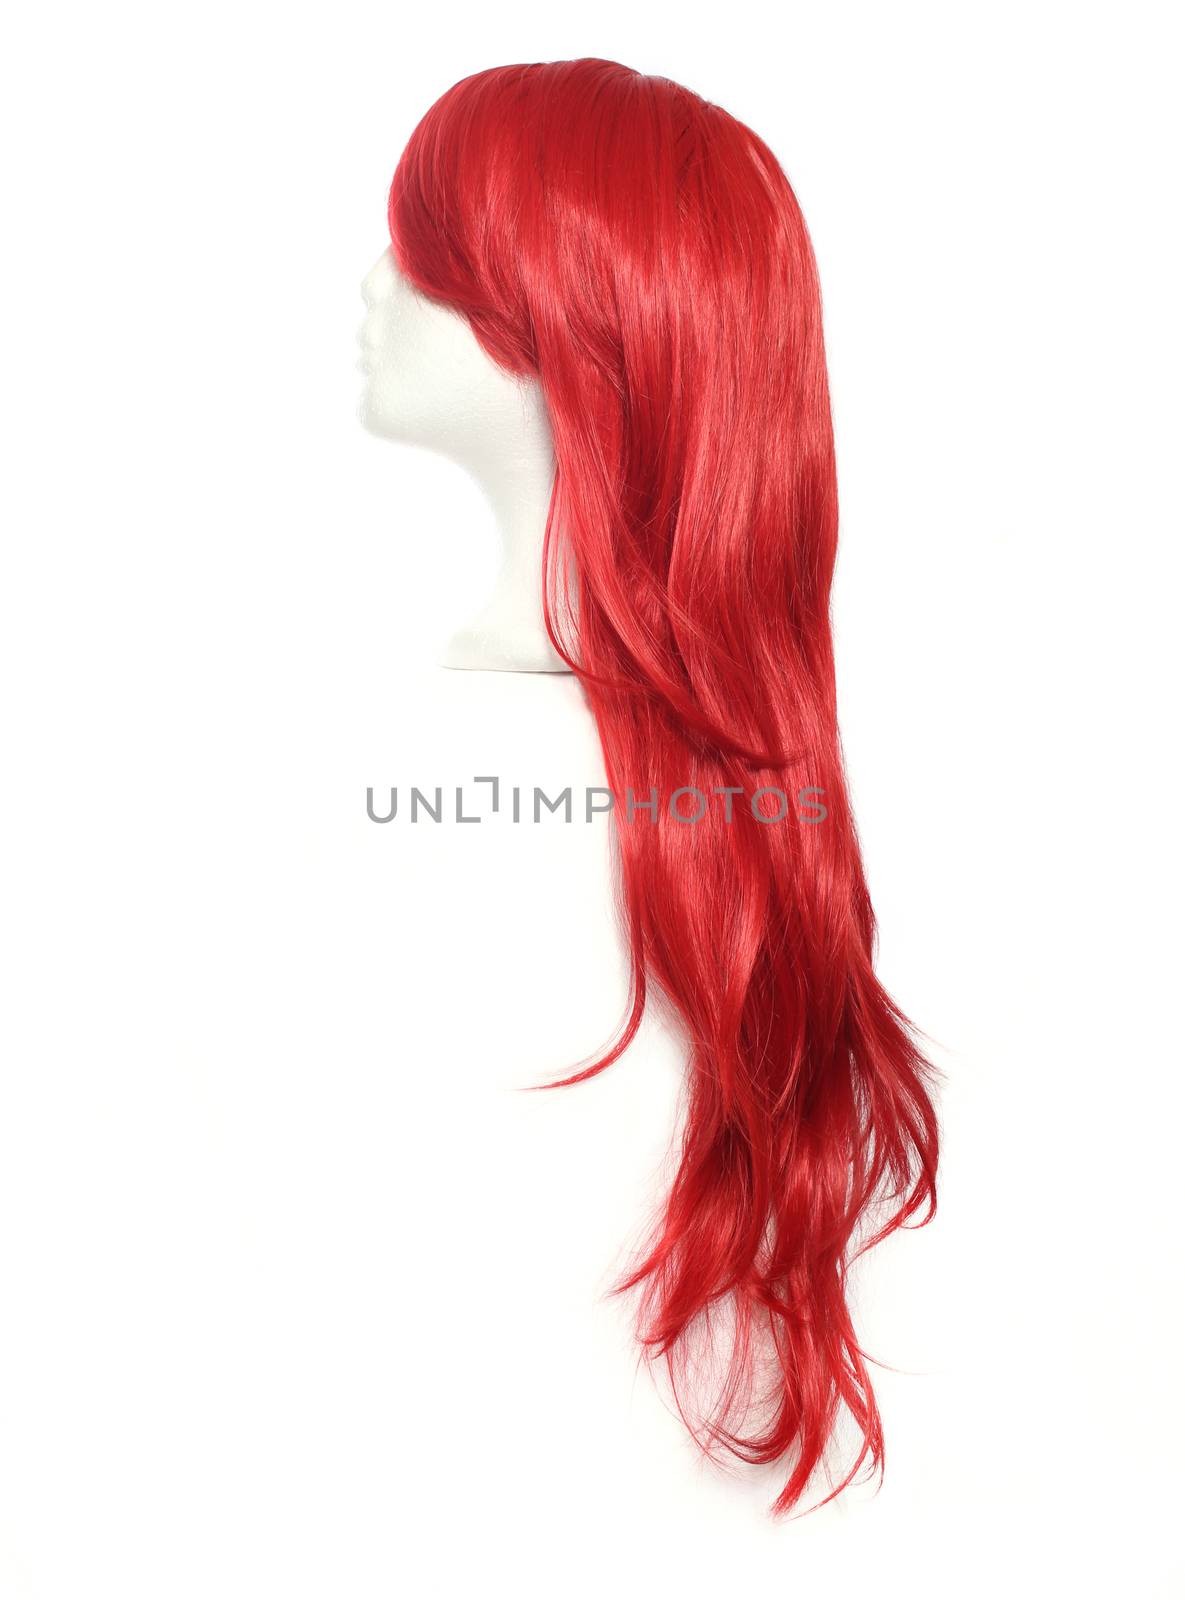 Red Wig on mannequin head isolated on white by Marti157900